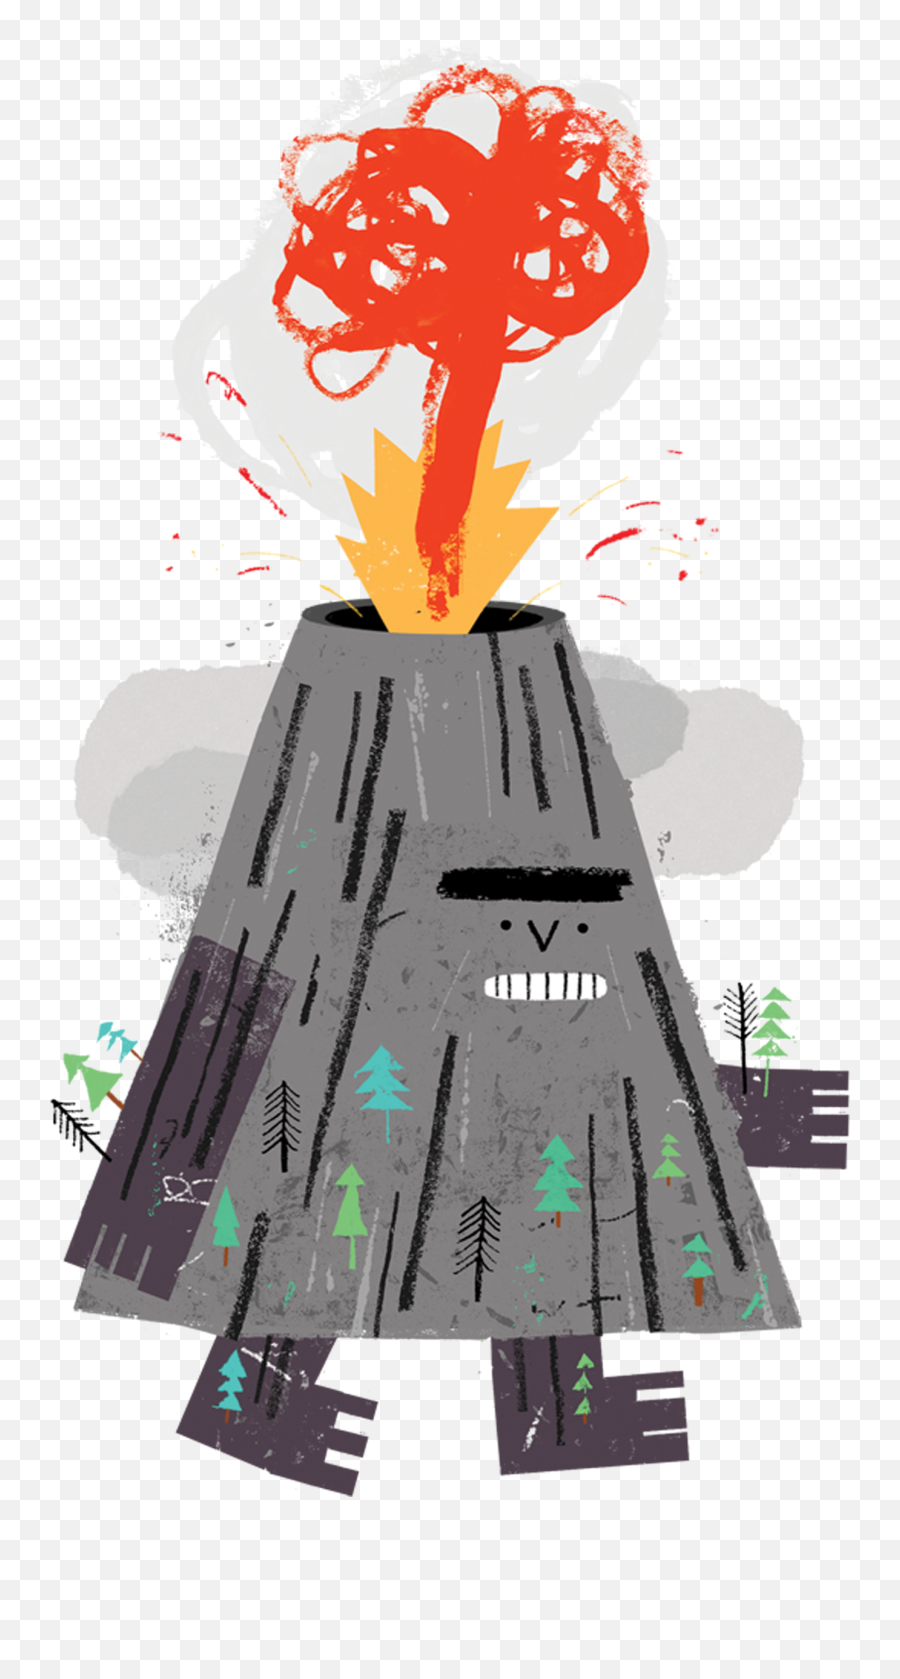 Download Volcano - Drawing Png Image With No Background Volcano Drawing,Volcano Icon